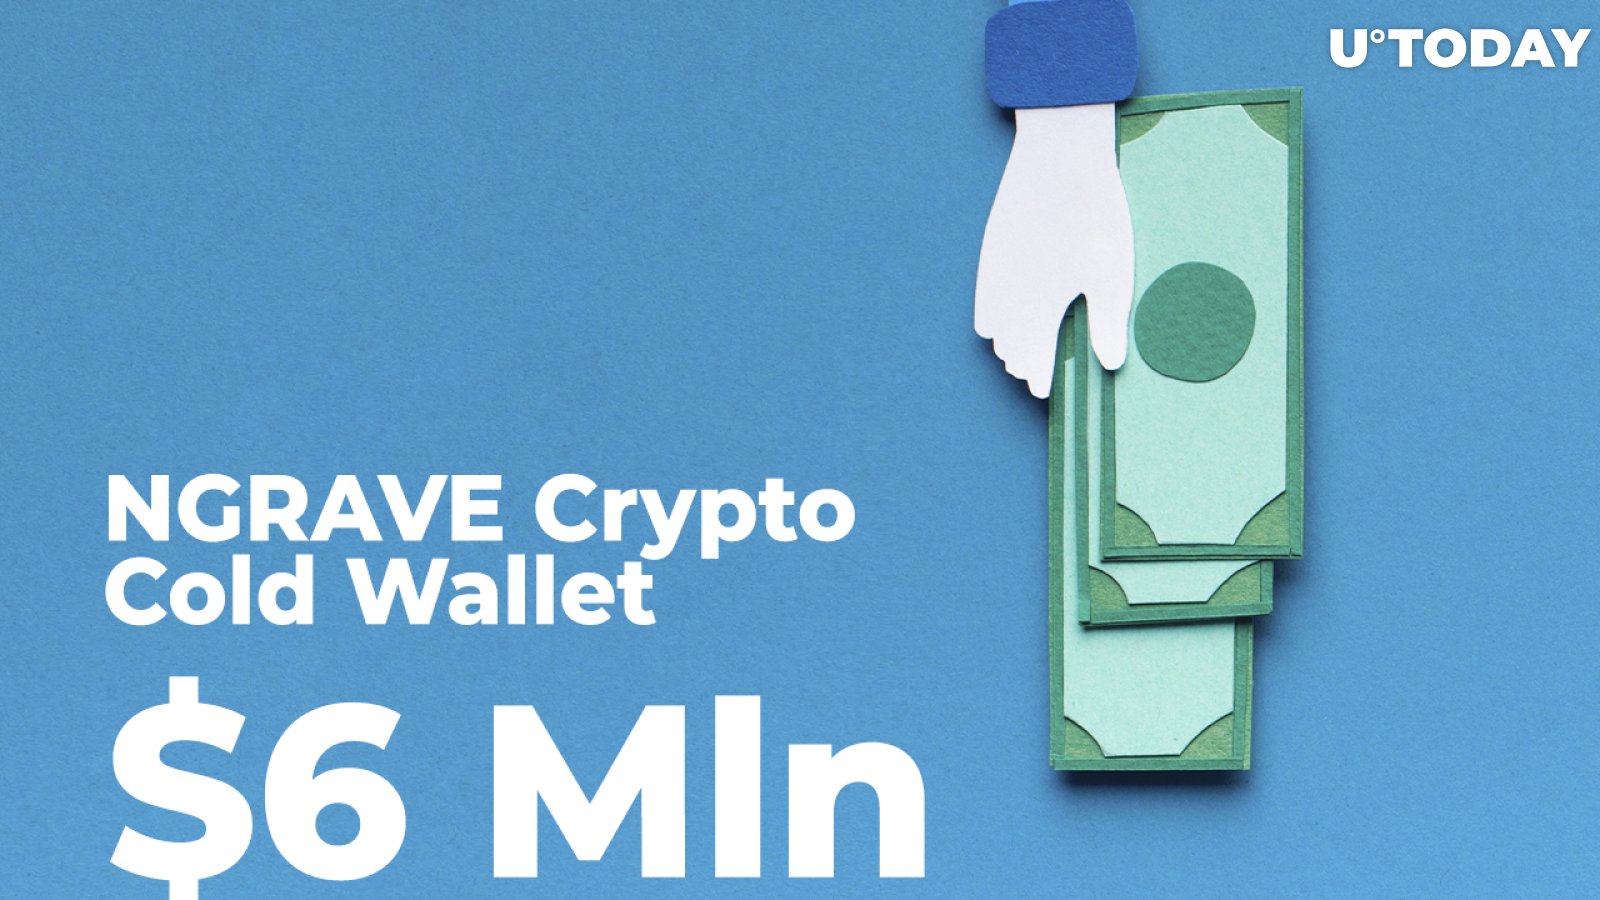 NGRAVE Crypto Cold Wallet Producer Secures $6 Million in Funding: Details